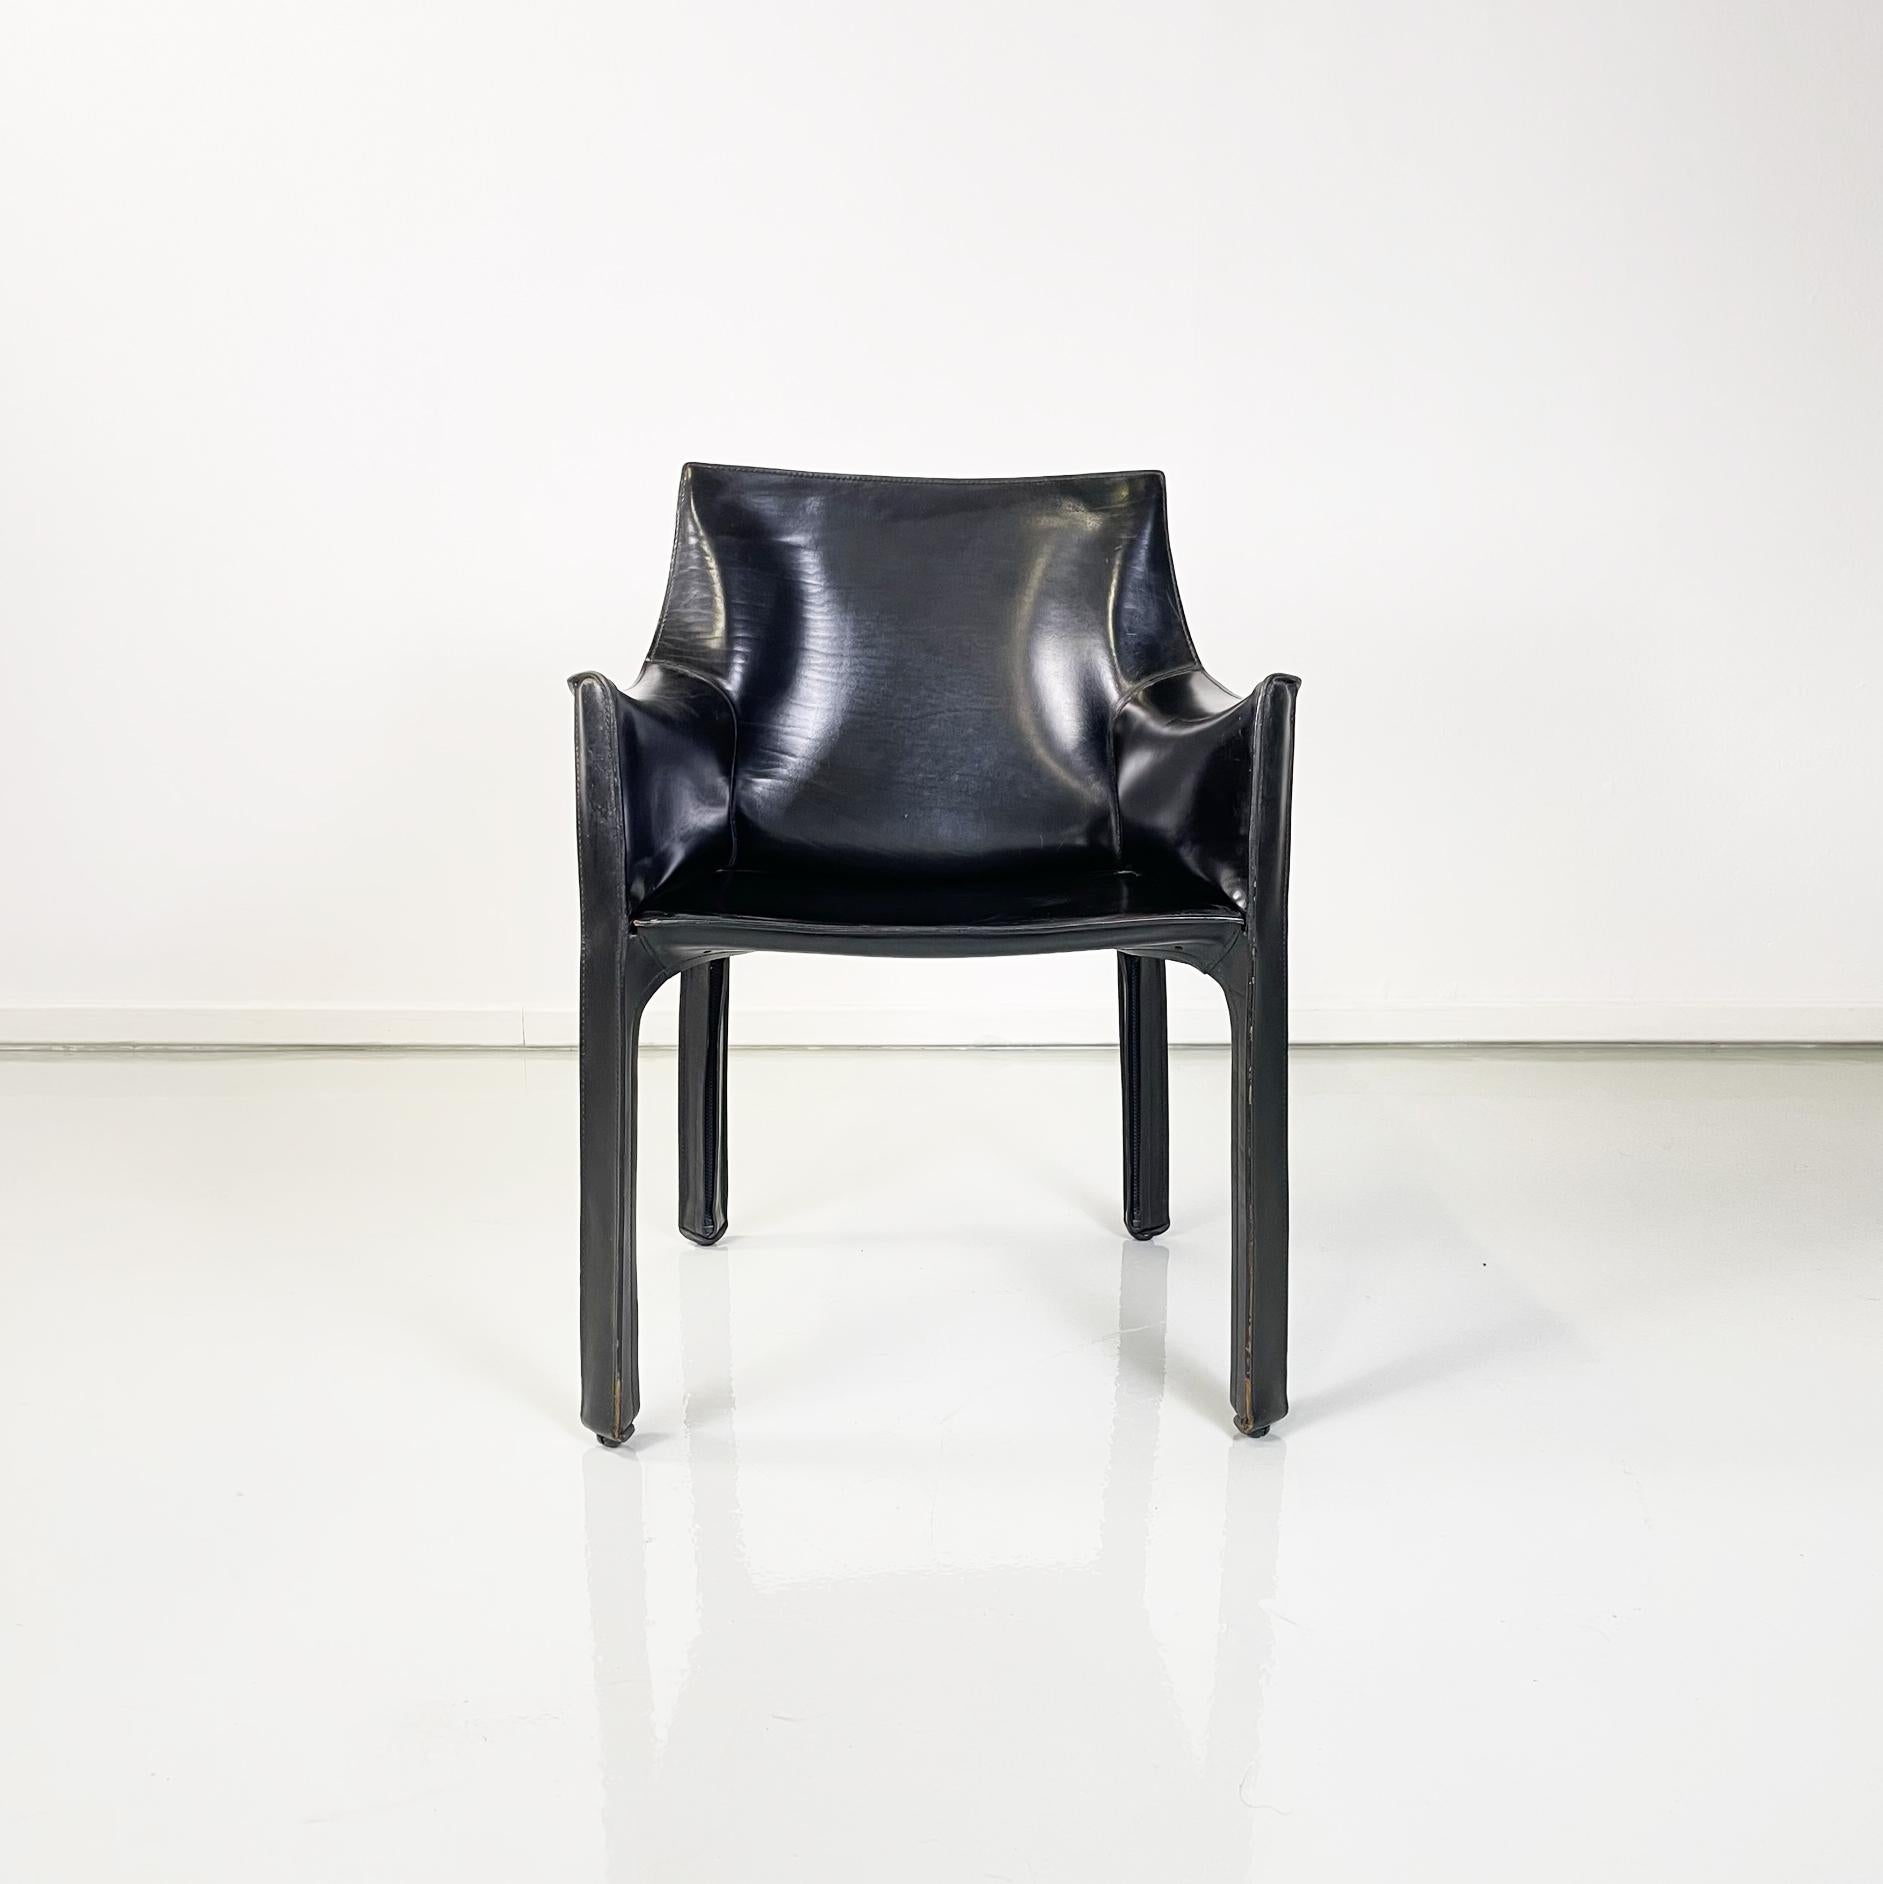 Italian modern Leather armchair mod CAB 414 by Mario Bellini for Cassina, 1980s 
Armchair mod. CAB 414 in black leather. The leather follows the shapes of the seat, back, armrests and square legs. Exposed seams. Under the seat there are hinges that